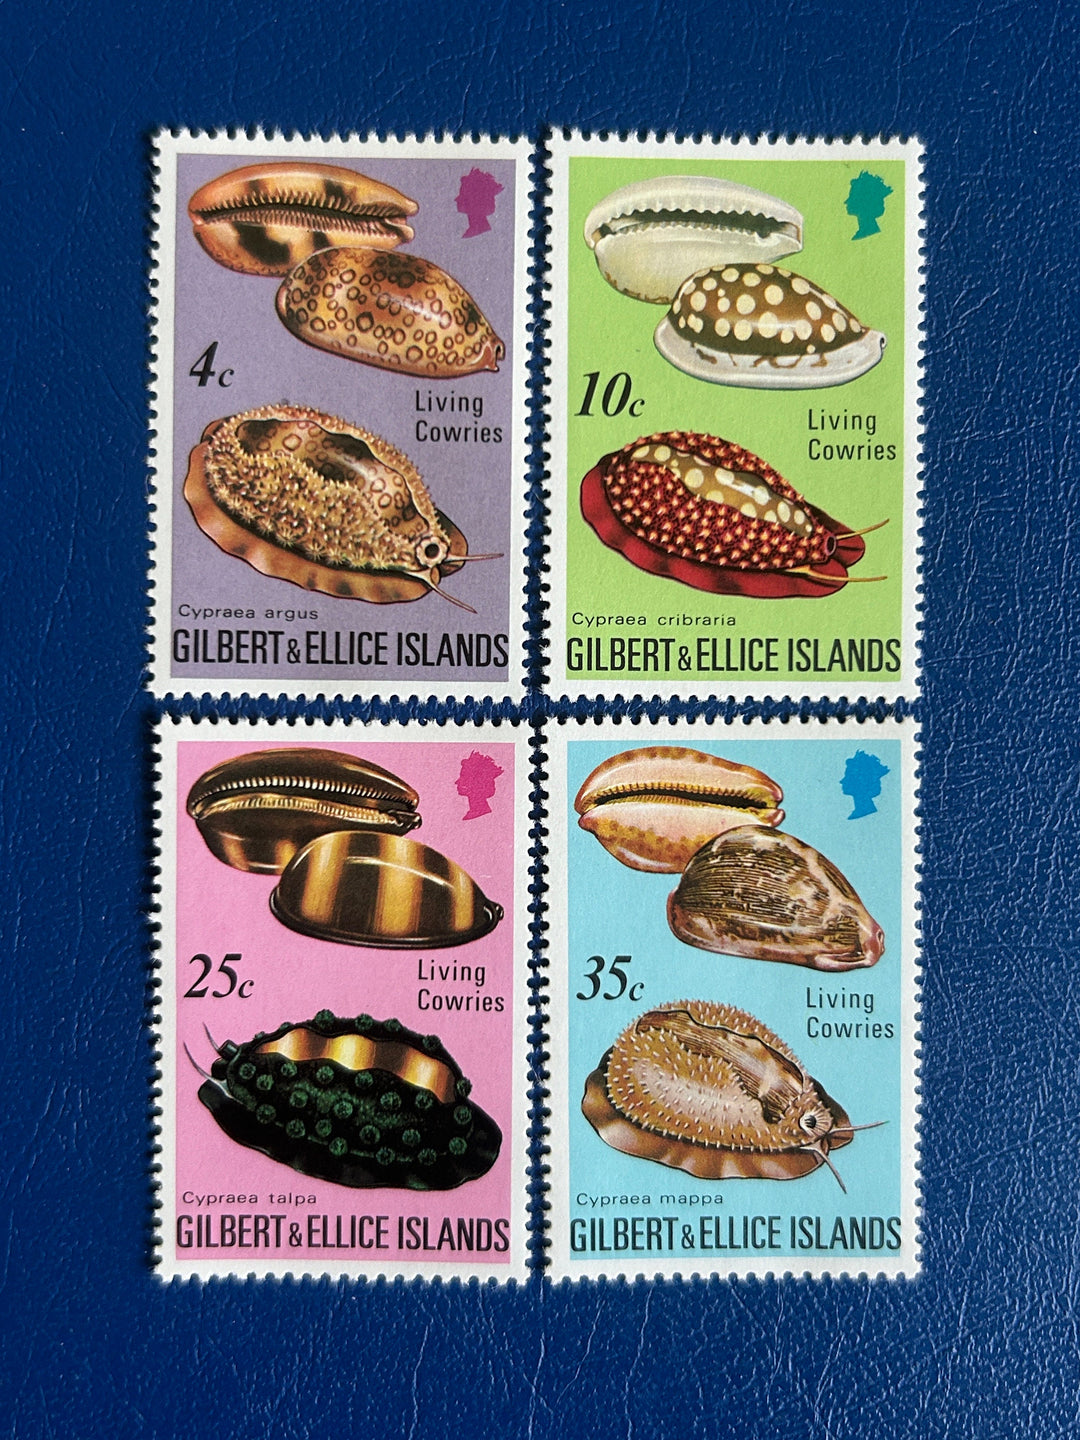 Gilbert & Ellice Islands - Original Vintage Postage Stamps - 1975 - Living Cowries - for the collector, artist or crafter